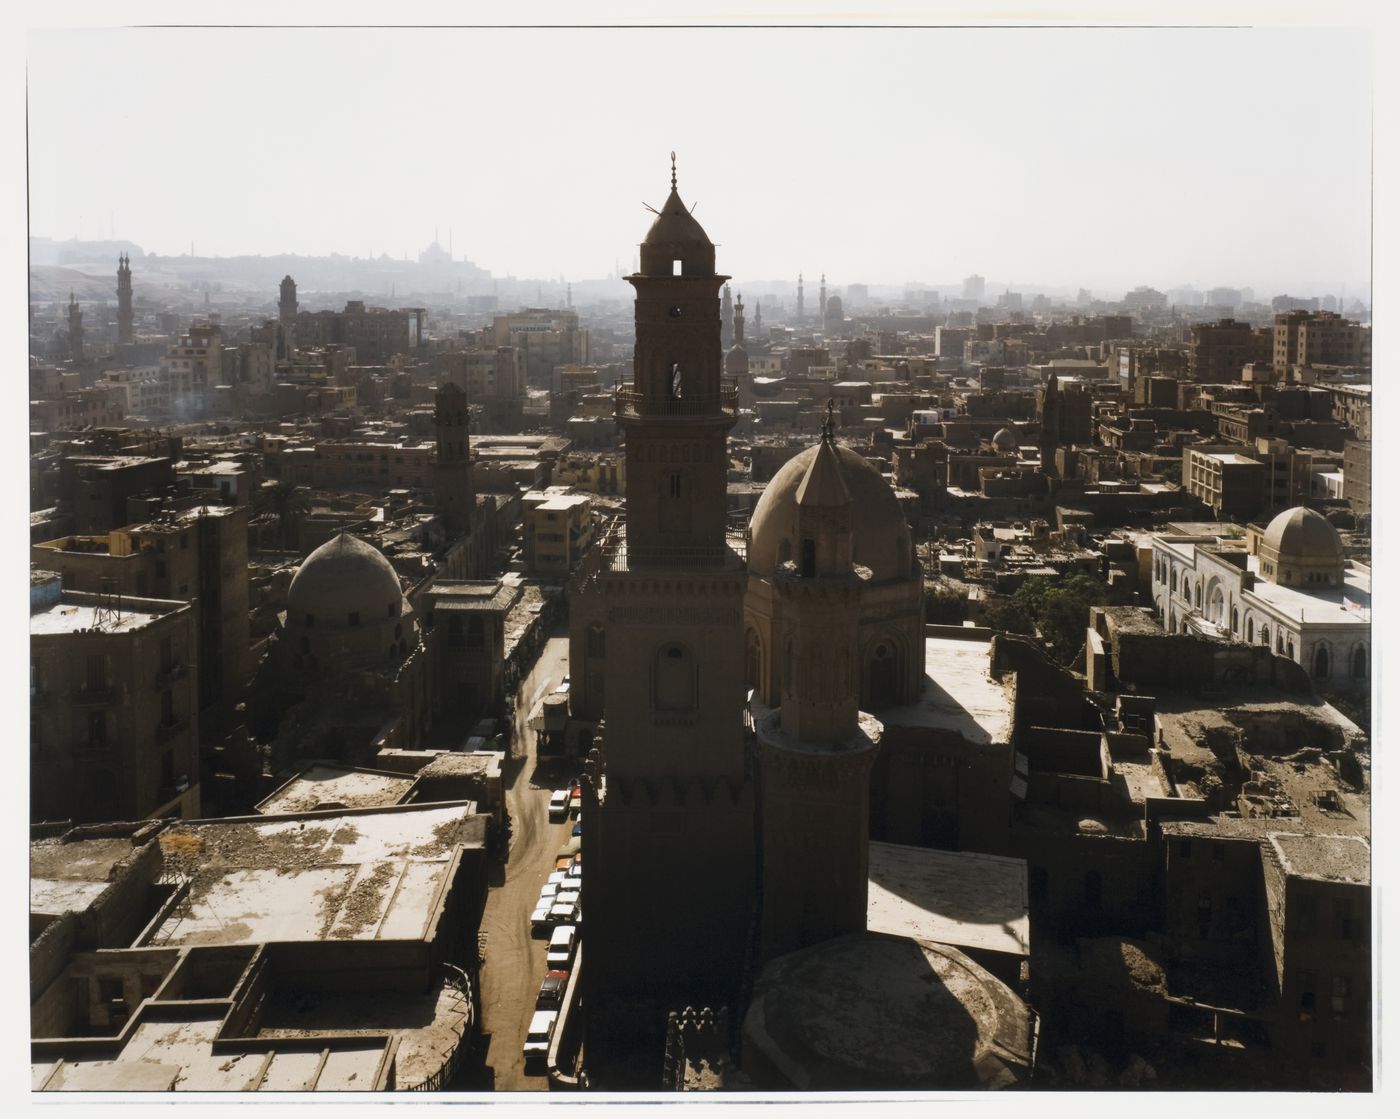 The Old City Looking South from the Minaret of the Mosque of Sultan Barquq